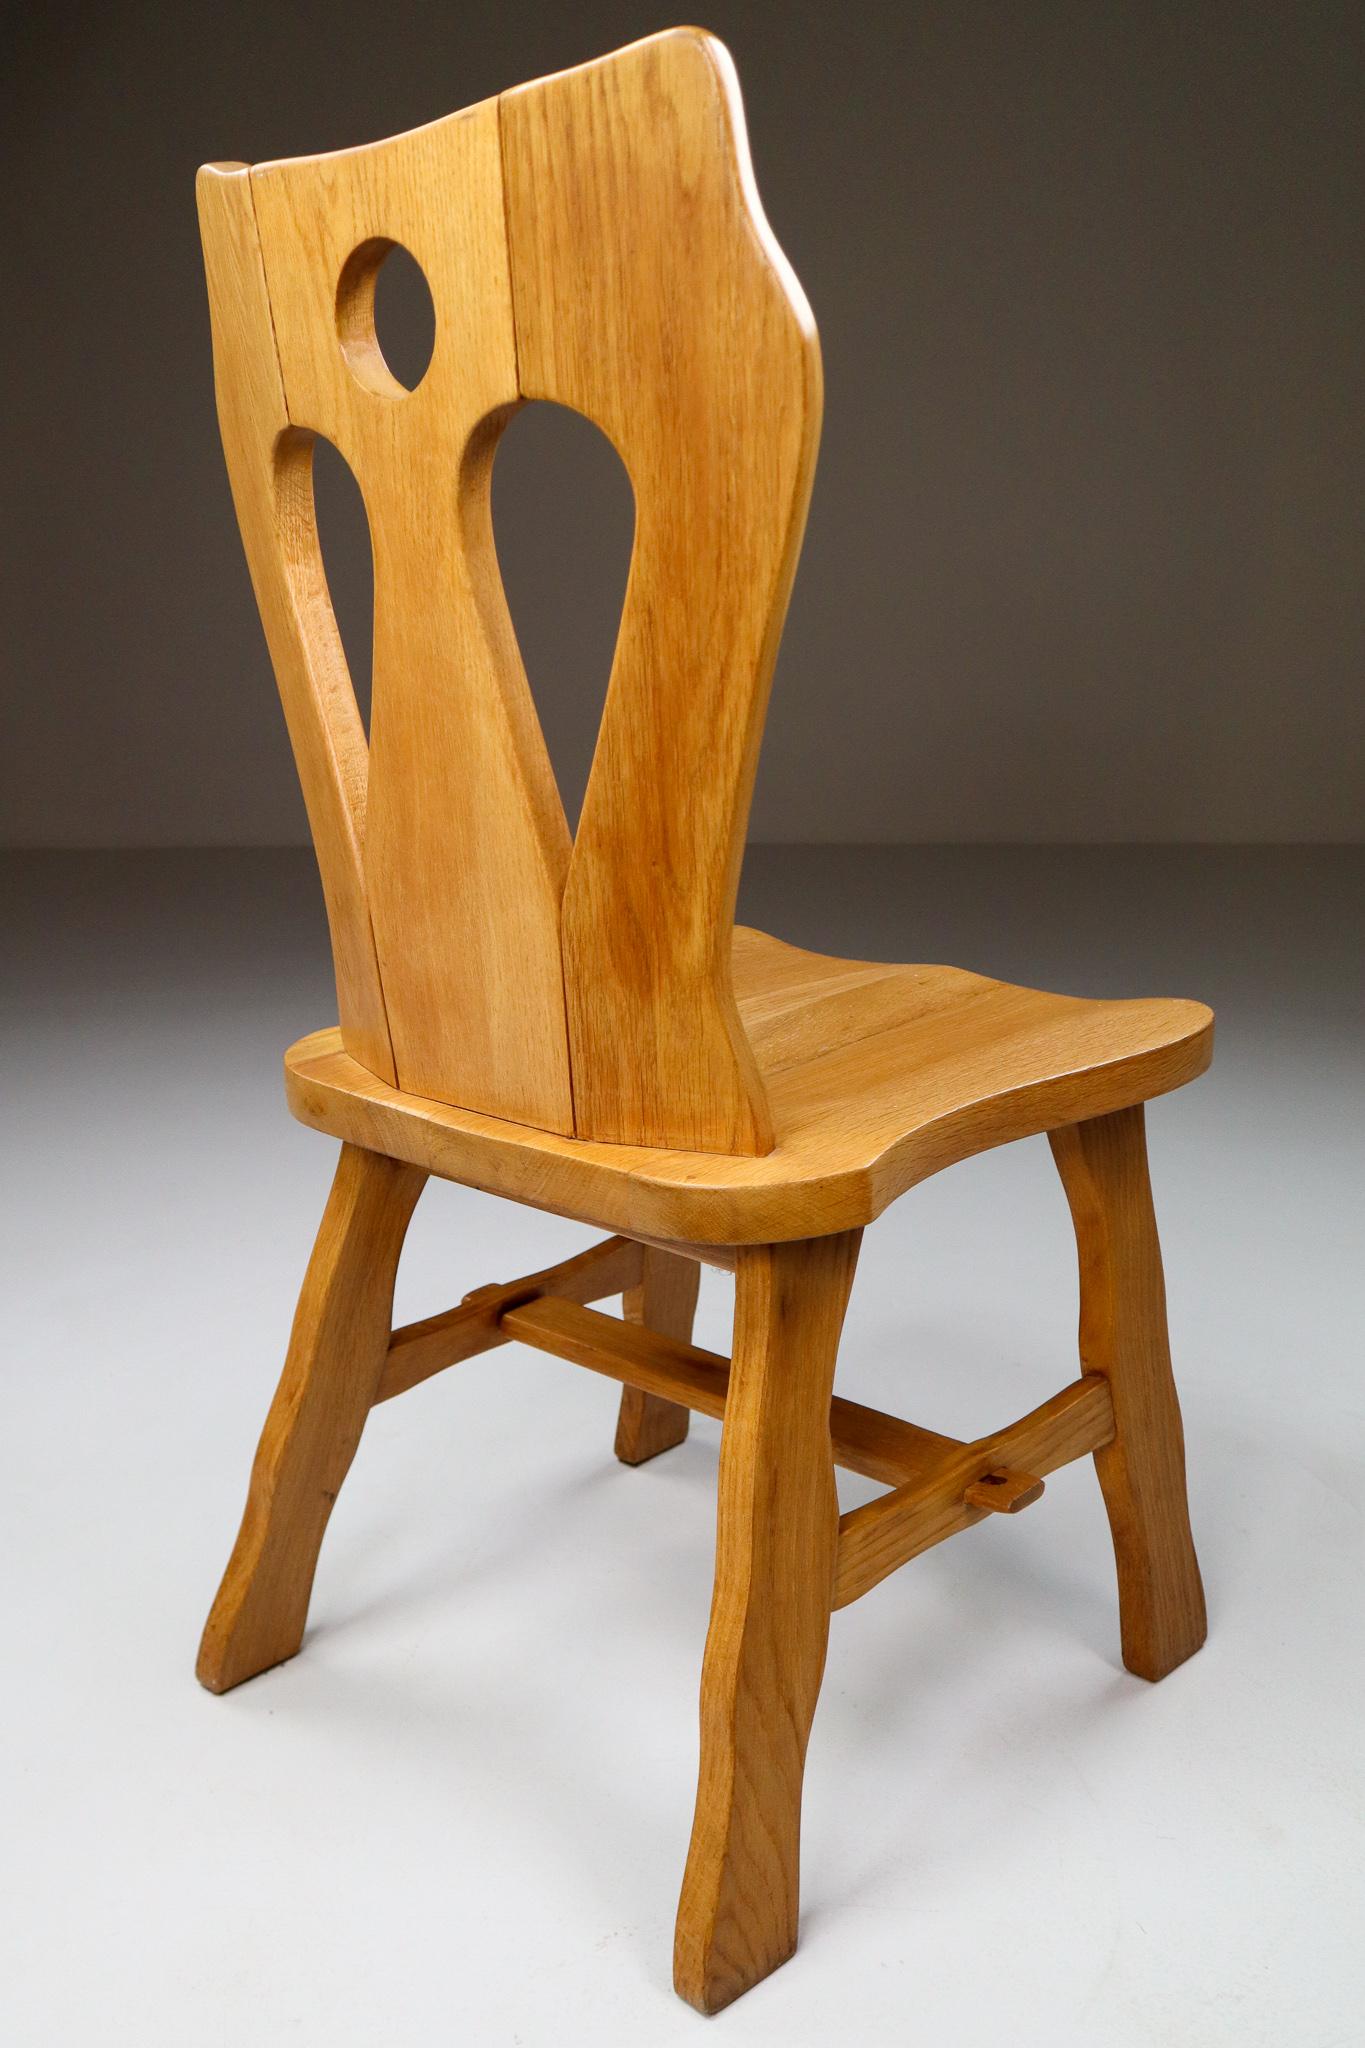 Set of four brutalist chairs in blond oak, Belgium, 1960s.

A set of four wooden dining chairs. These chairs are made of blond oak and sculpturally crafted by hand. The craftsmanship is still visible, they are made of solid oak wood and